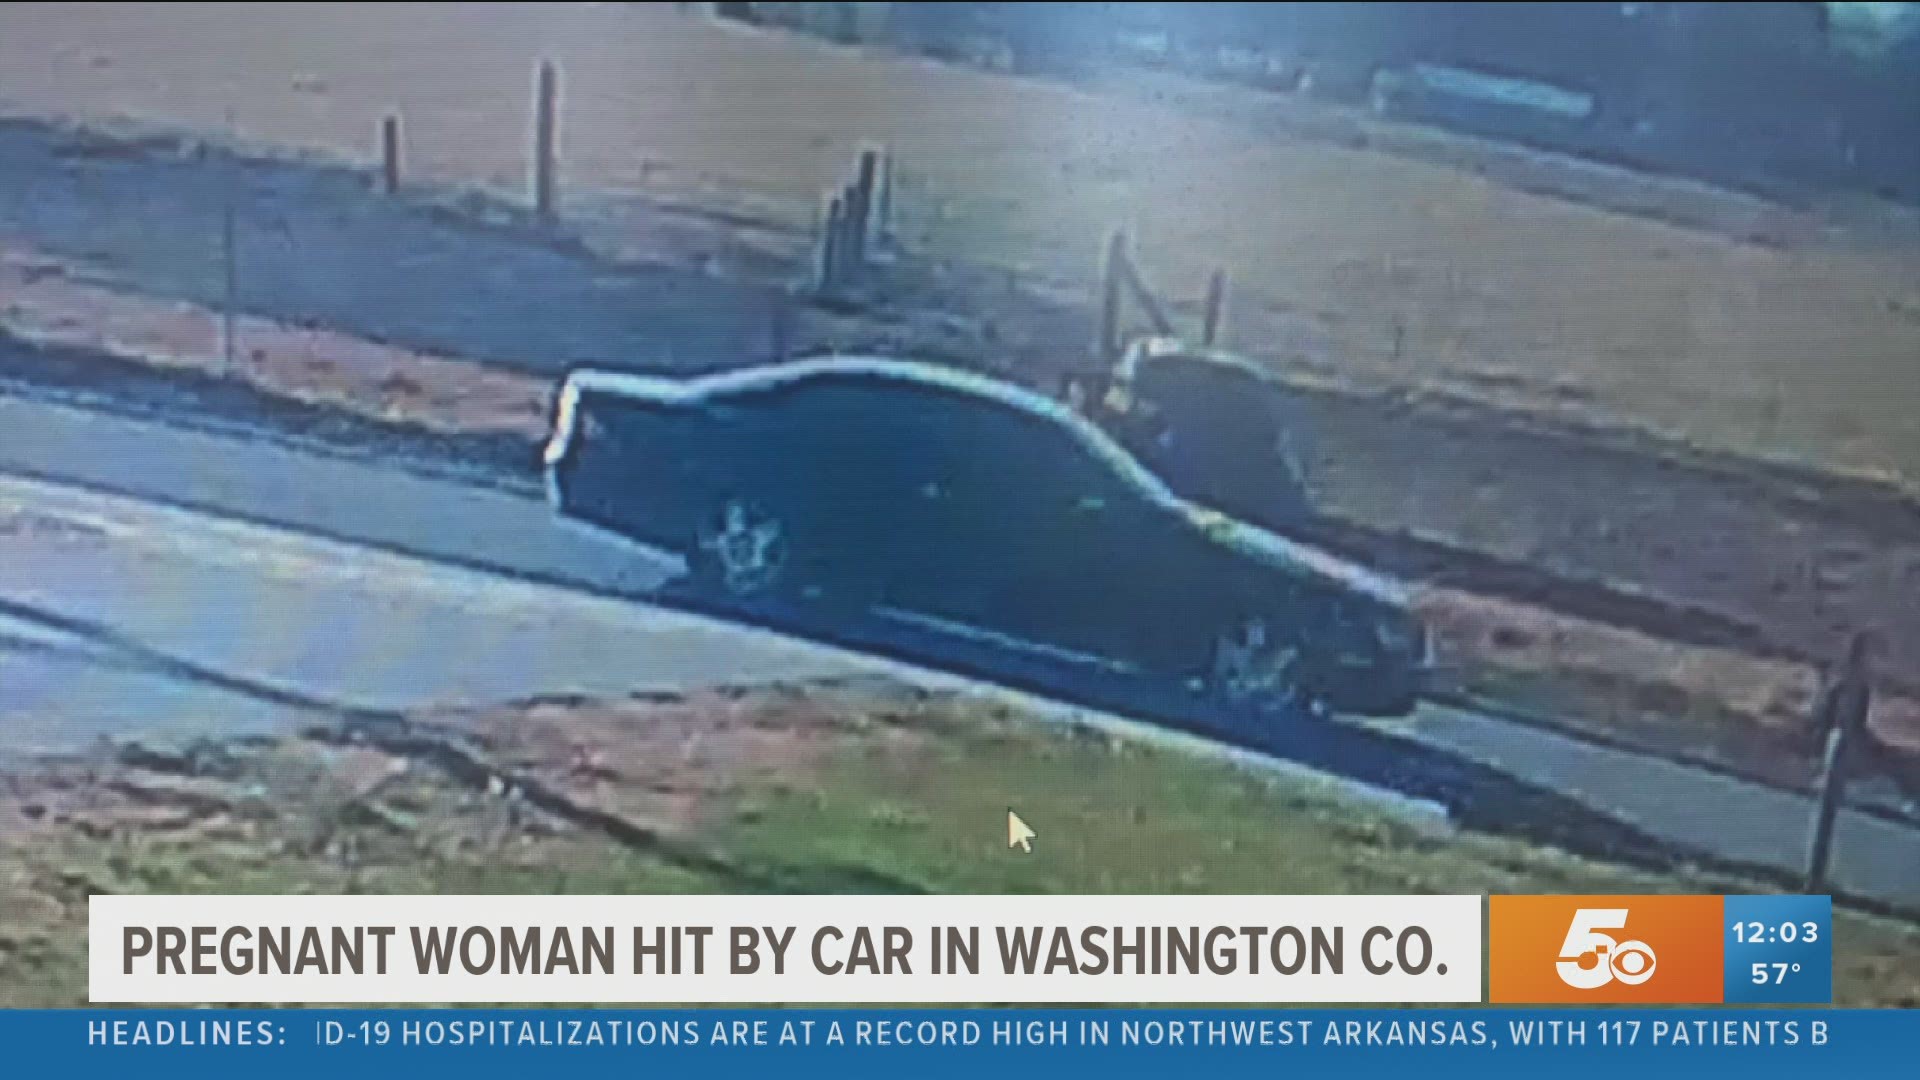 Do you recognize this vehicle? The driver struck a pregnant jogger on Arbor Acres Road and sped off instead of stopping to check on her.